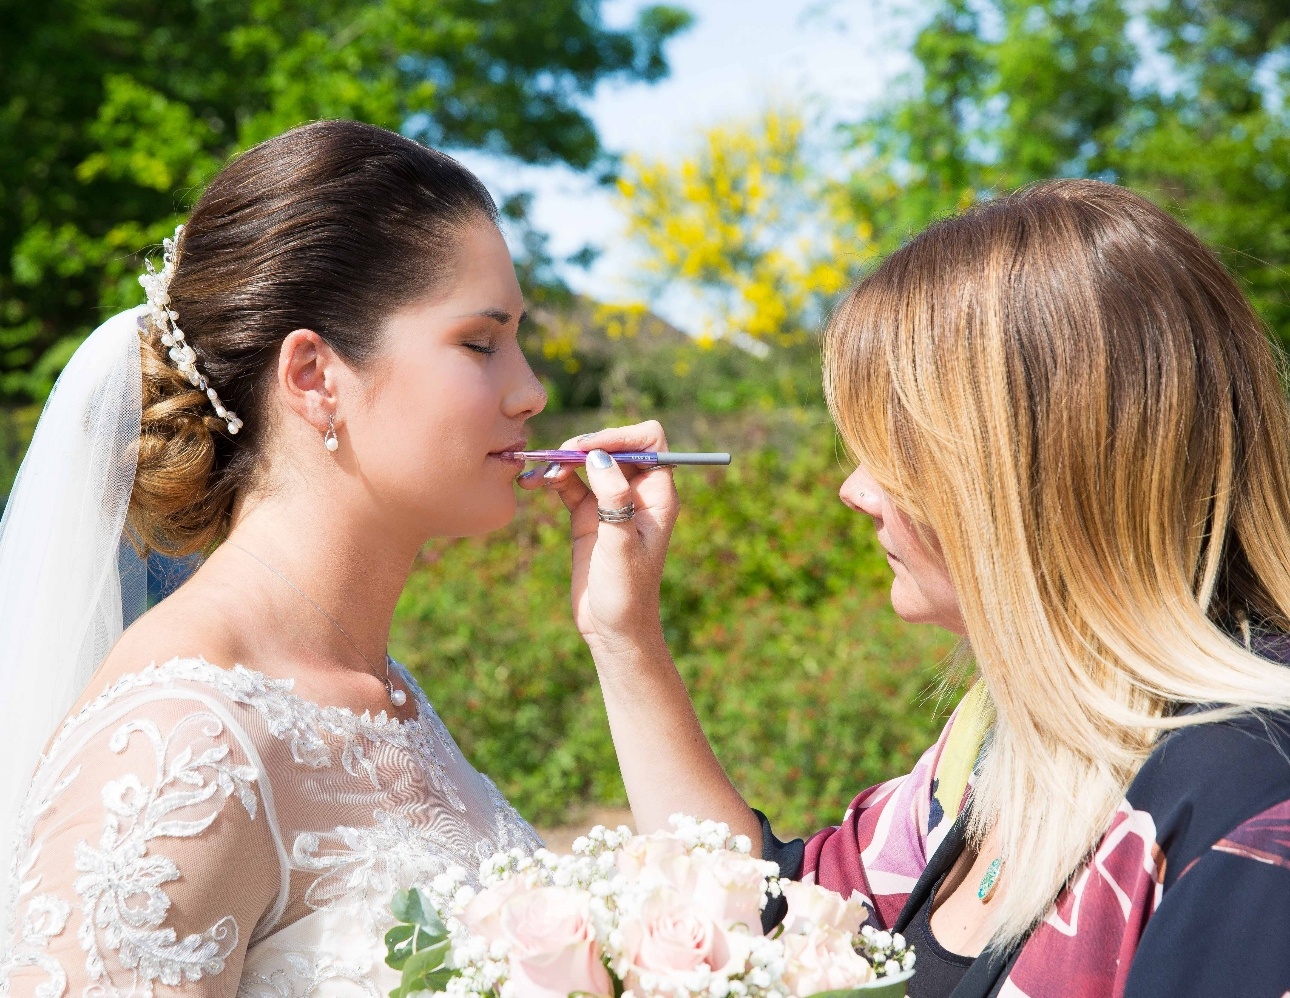 Makeup and bouquet